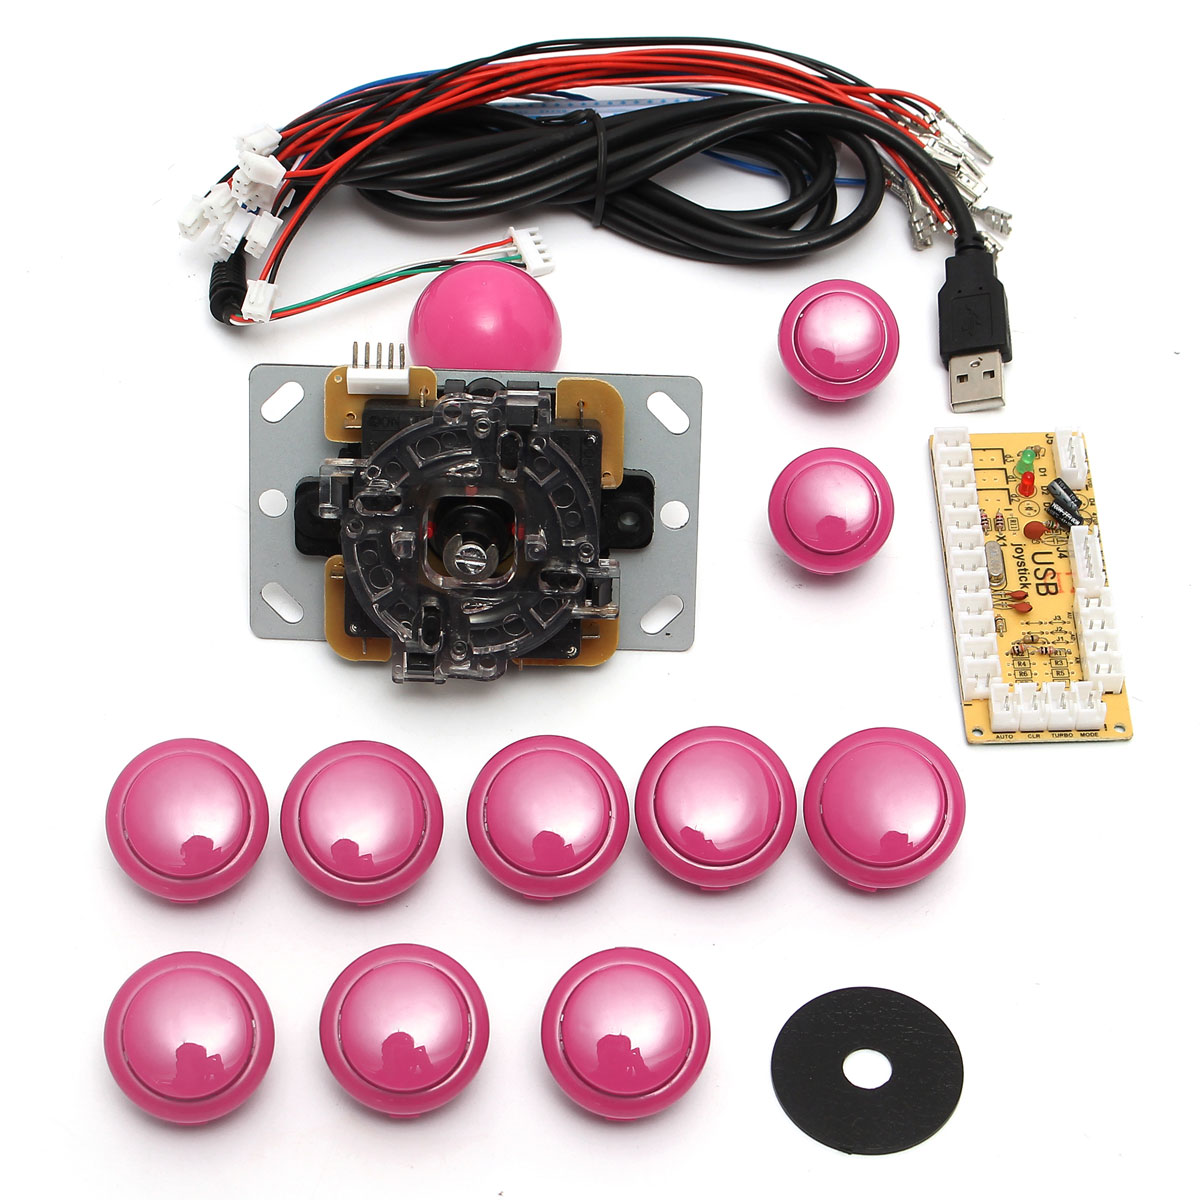 Game DIY Arcade Set Kits Replacement Parts USB Encoder to PC Joystick and Buttons 32